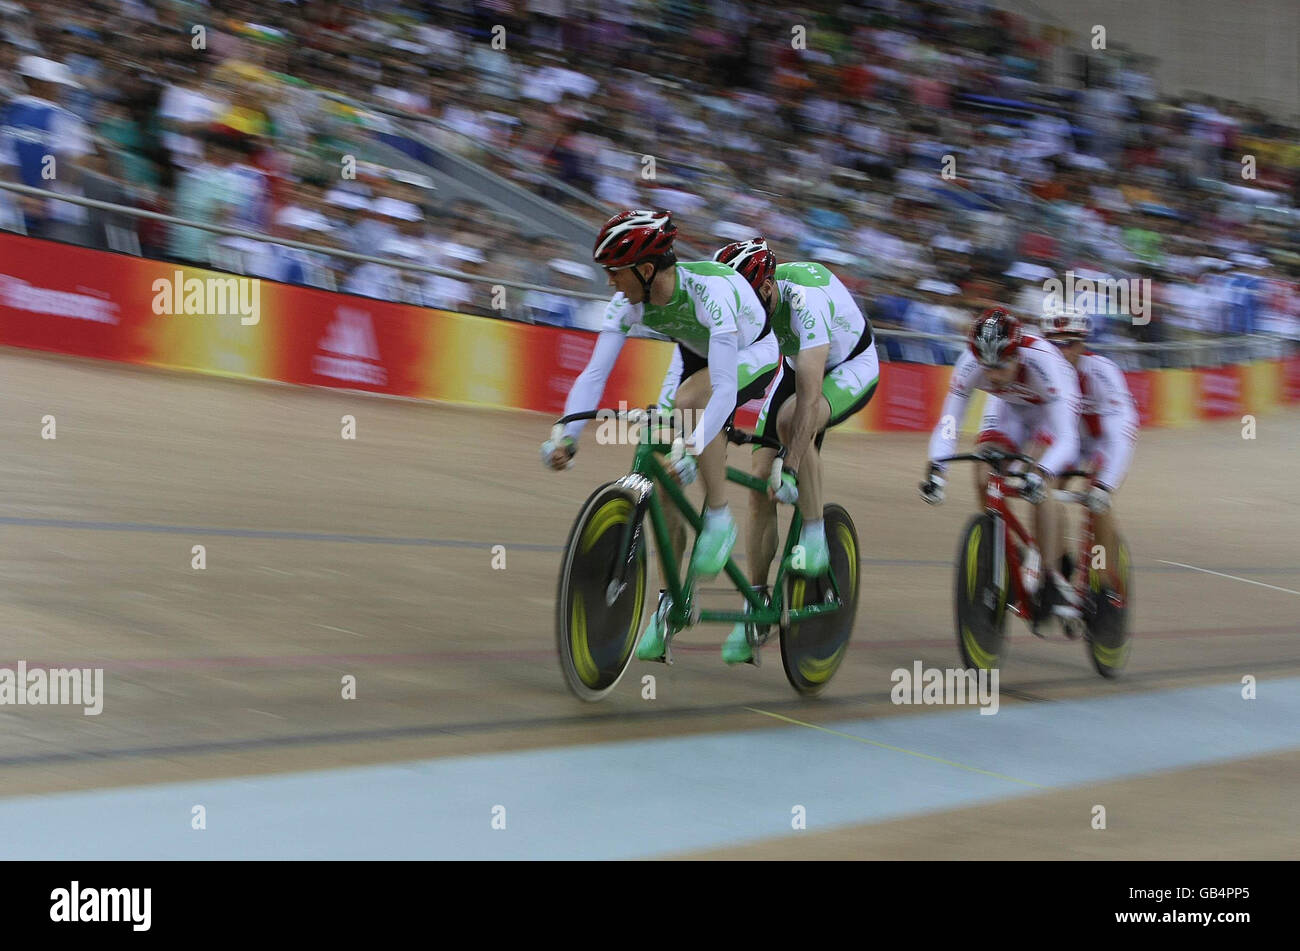 Irish cyclists David Peelo and Michael Delaney competiting in the Mens Sprint B&VI (1-3) with Canada closing in behind in the Laoshan Velodrome at the Beijing Paralympic Games 2008, China. Stock Photo